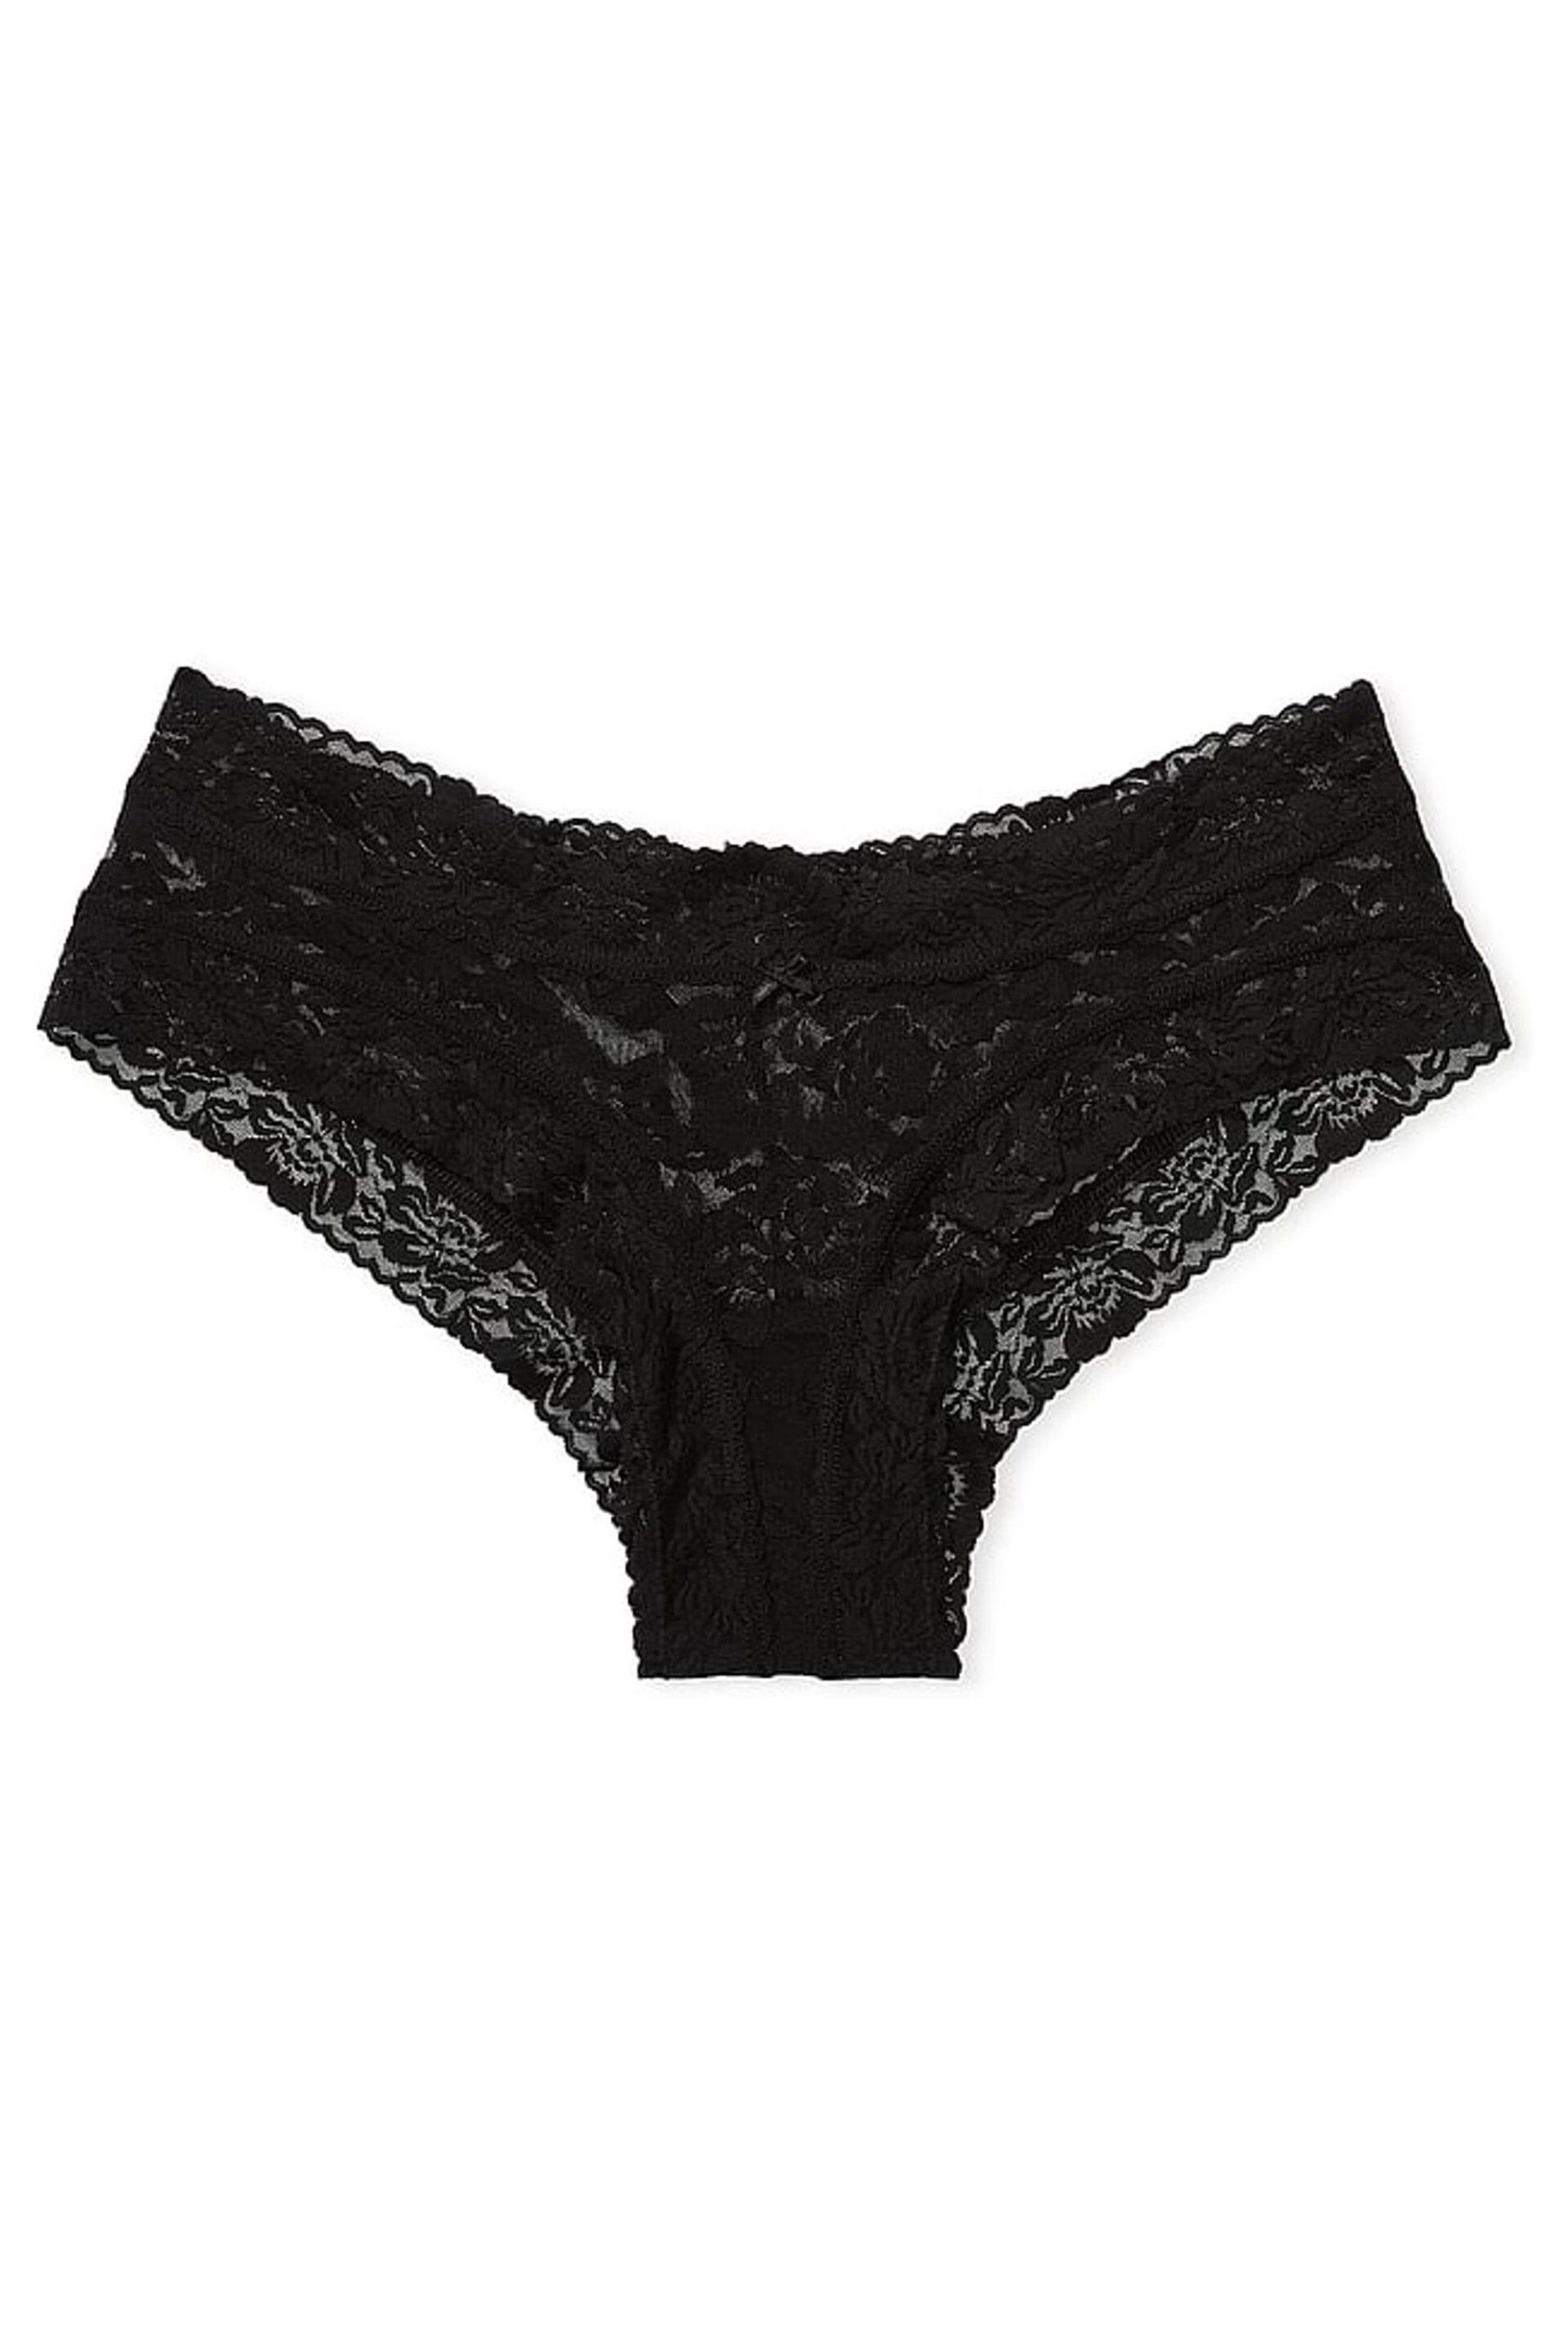 Victoria's Secret Black Roses Cheeky Lace Knickers - Image 3 of 3